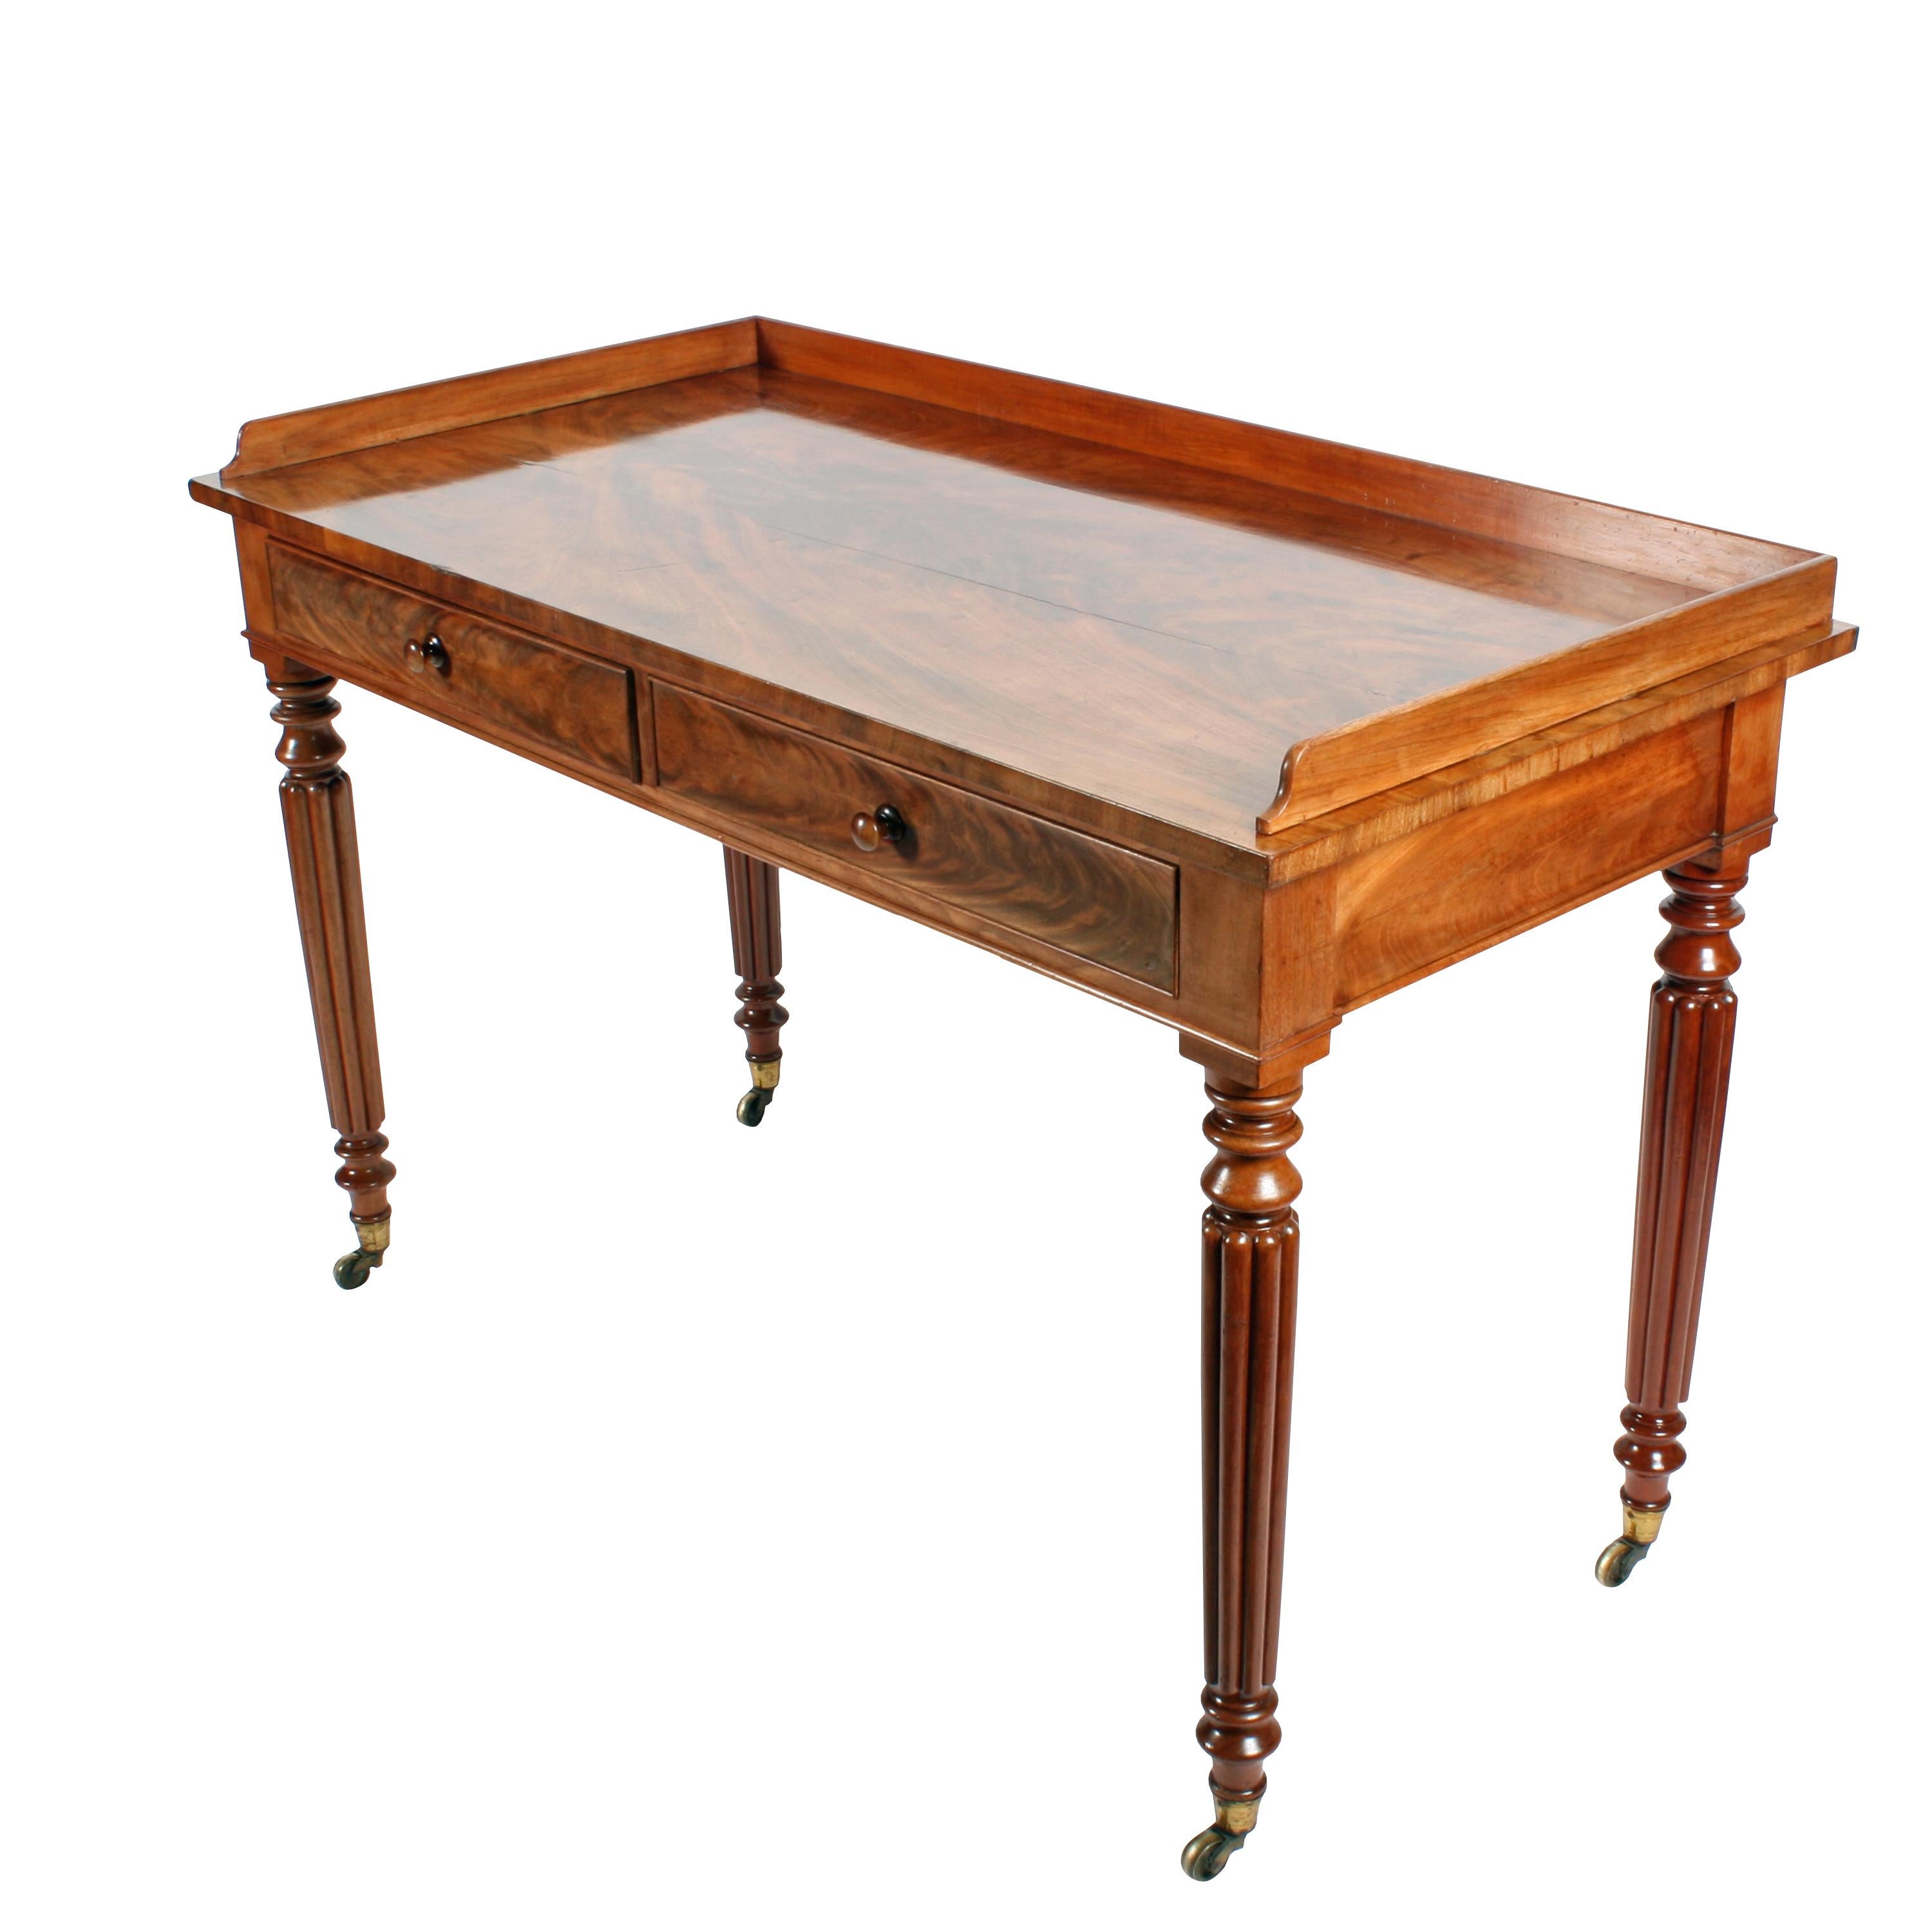 An early 19th century Georgian mahogany two-drawer side table.

The table is in the style of 'Gillows of Lancaster' with a gallery back and four turned tapering and reeded legs that have gilt brass casters.

The drawers are mahogany lined with